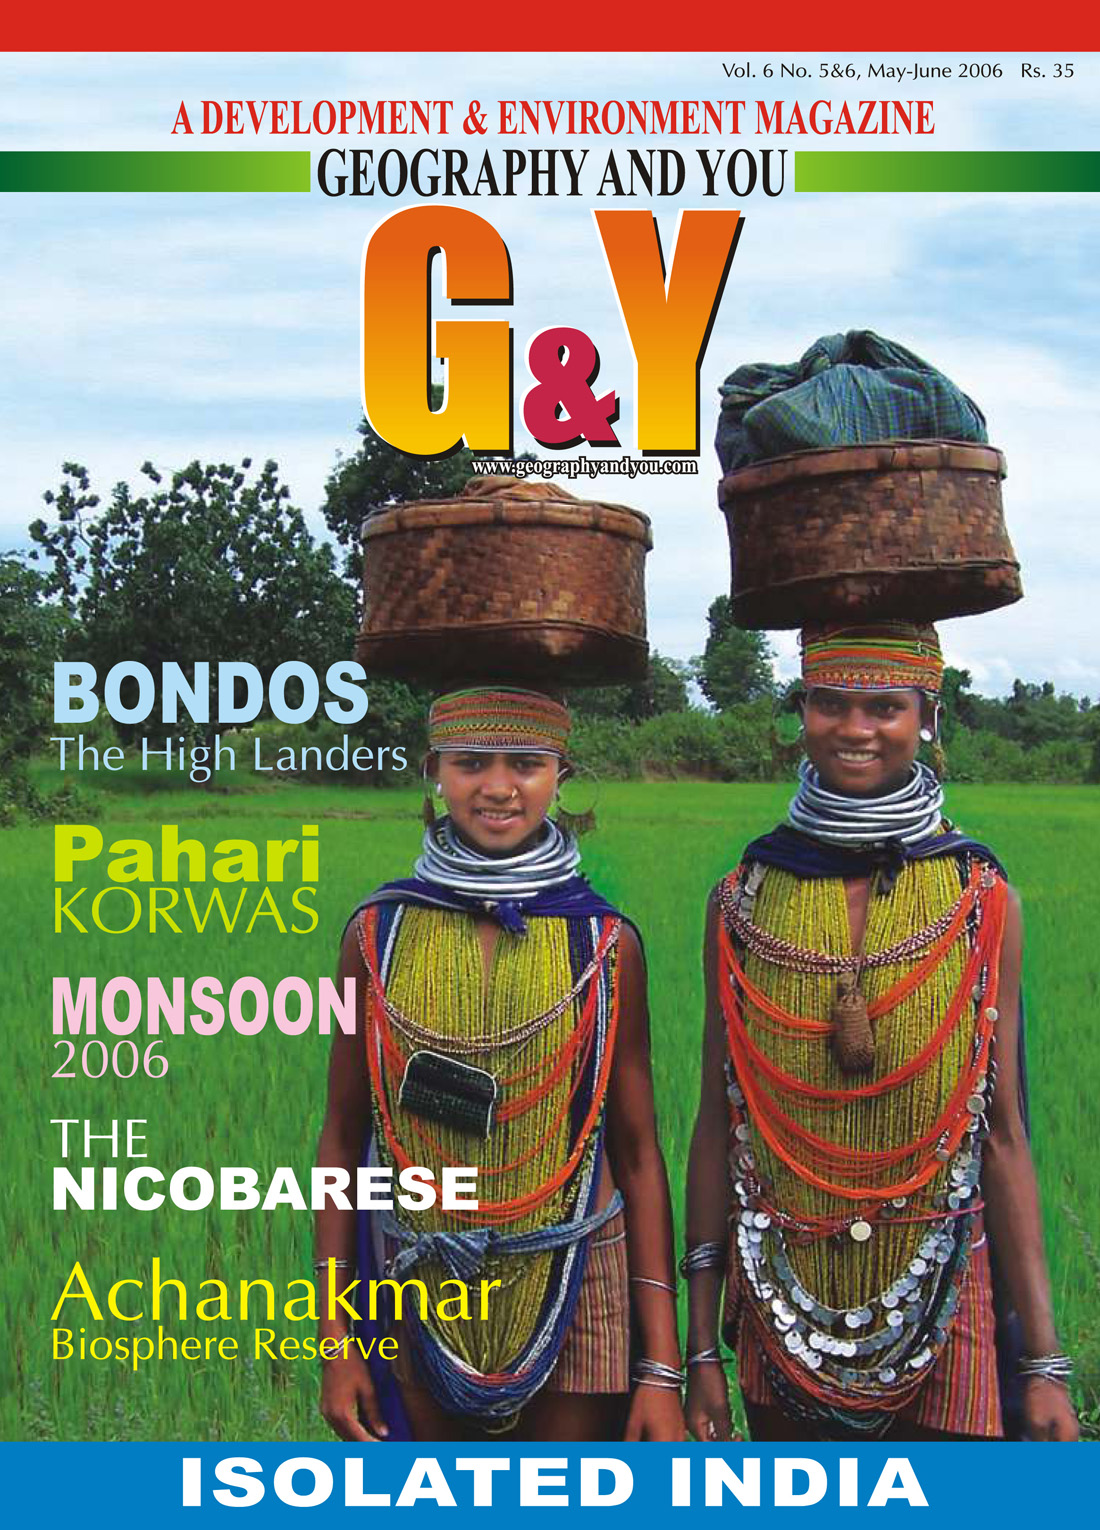 Isolated India (May-June 2006) cover